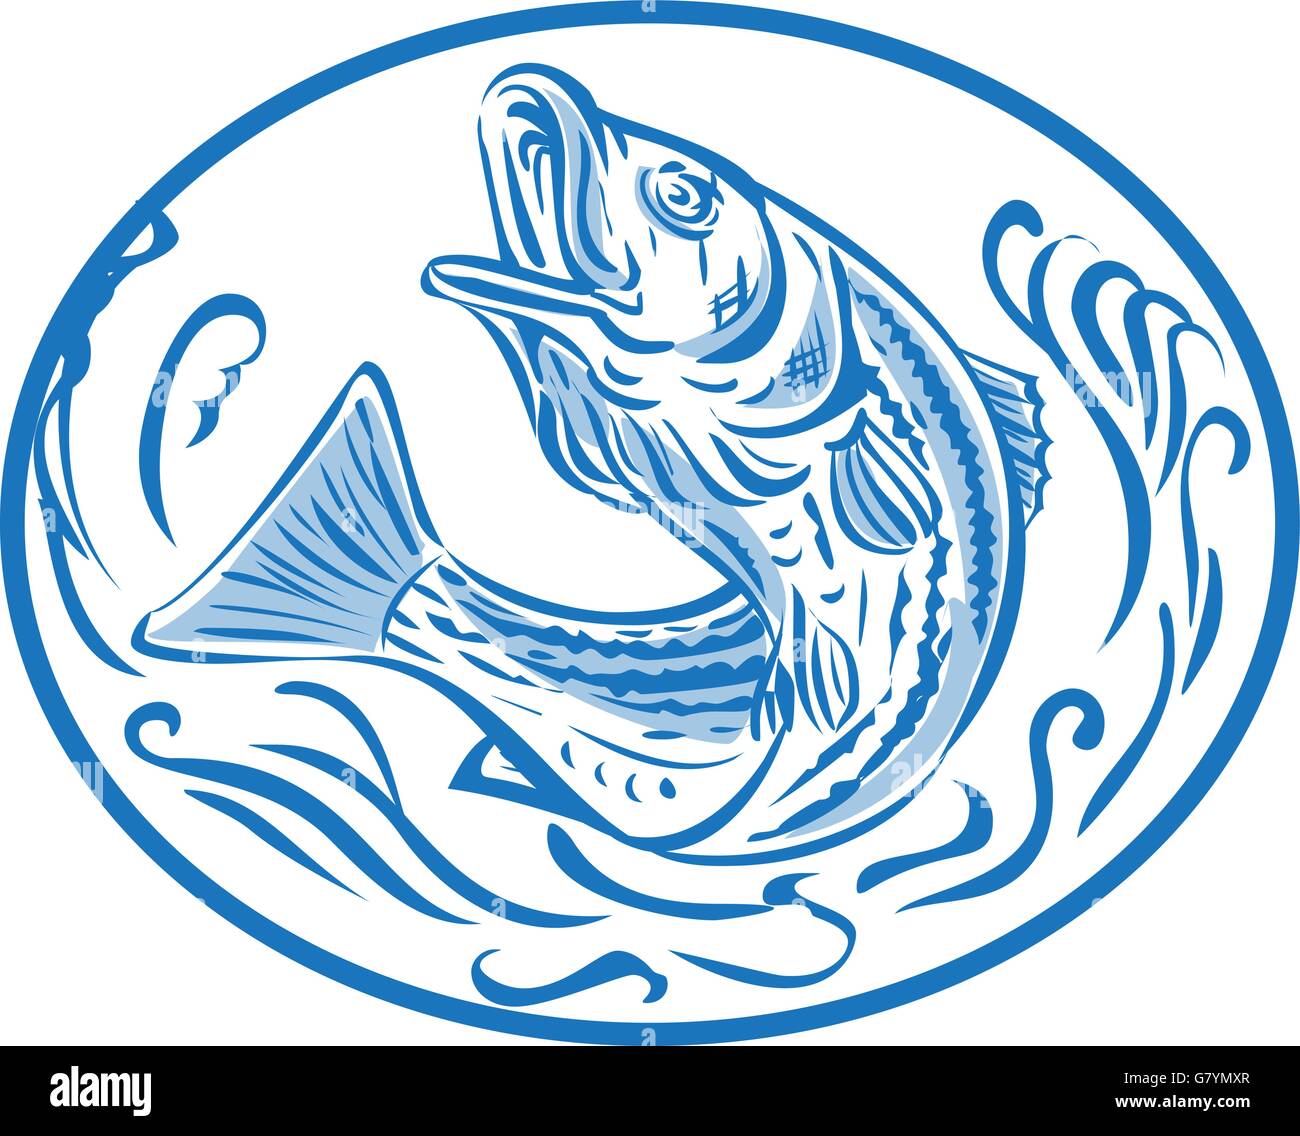 Drawing sketch style illustratoin of a rockfish also called striped bass ,Morone saxatilis, Atlantic striped bass, striper, linesider, pimpfish or rock jumping up set inside oval shape. Stock Vector